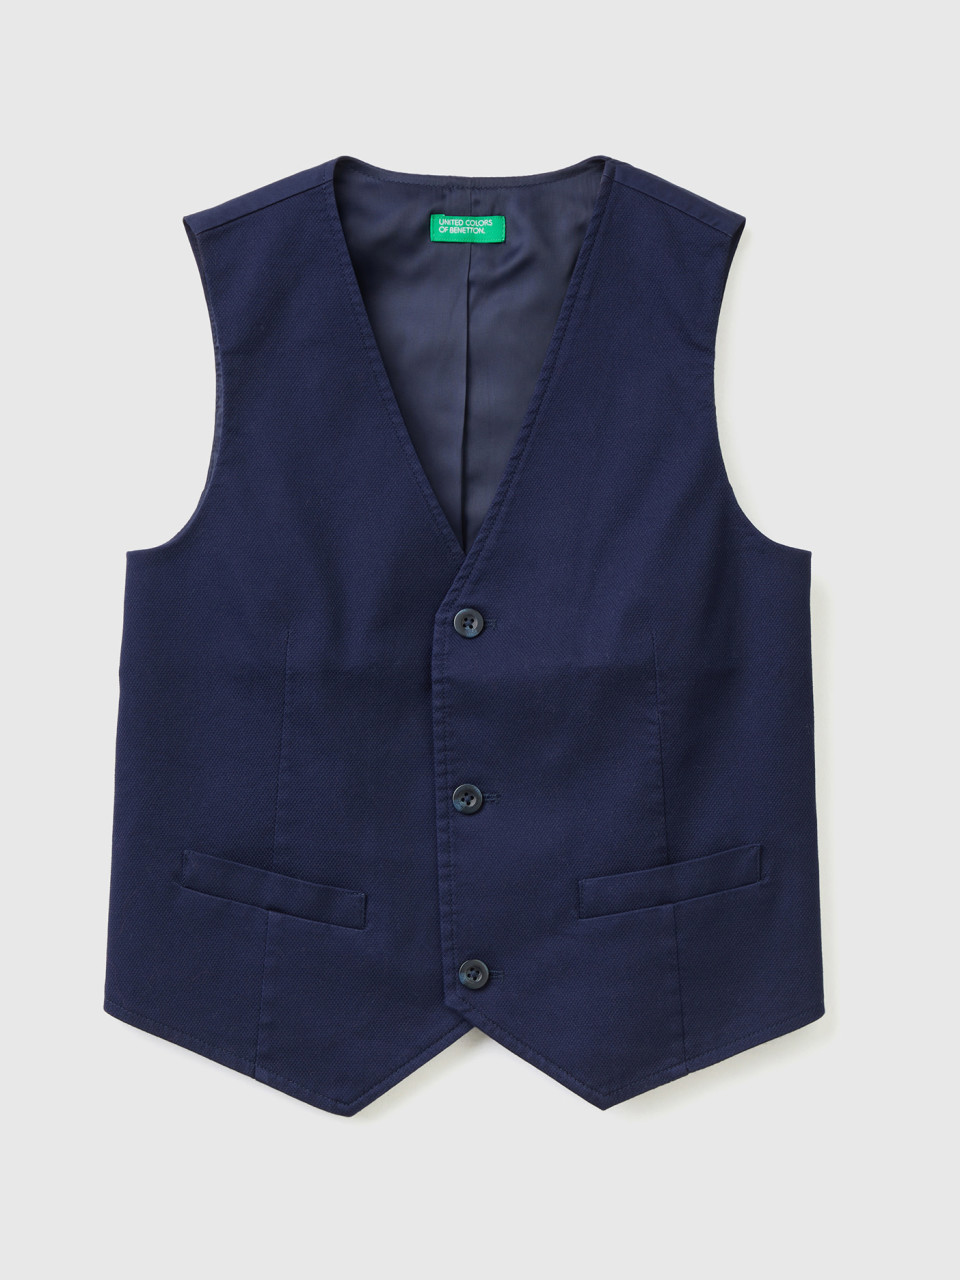 Benetton, Lined Vest With Buttons, Dark Blue, Kids